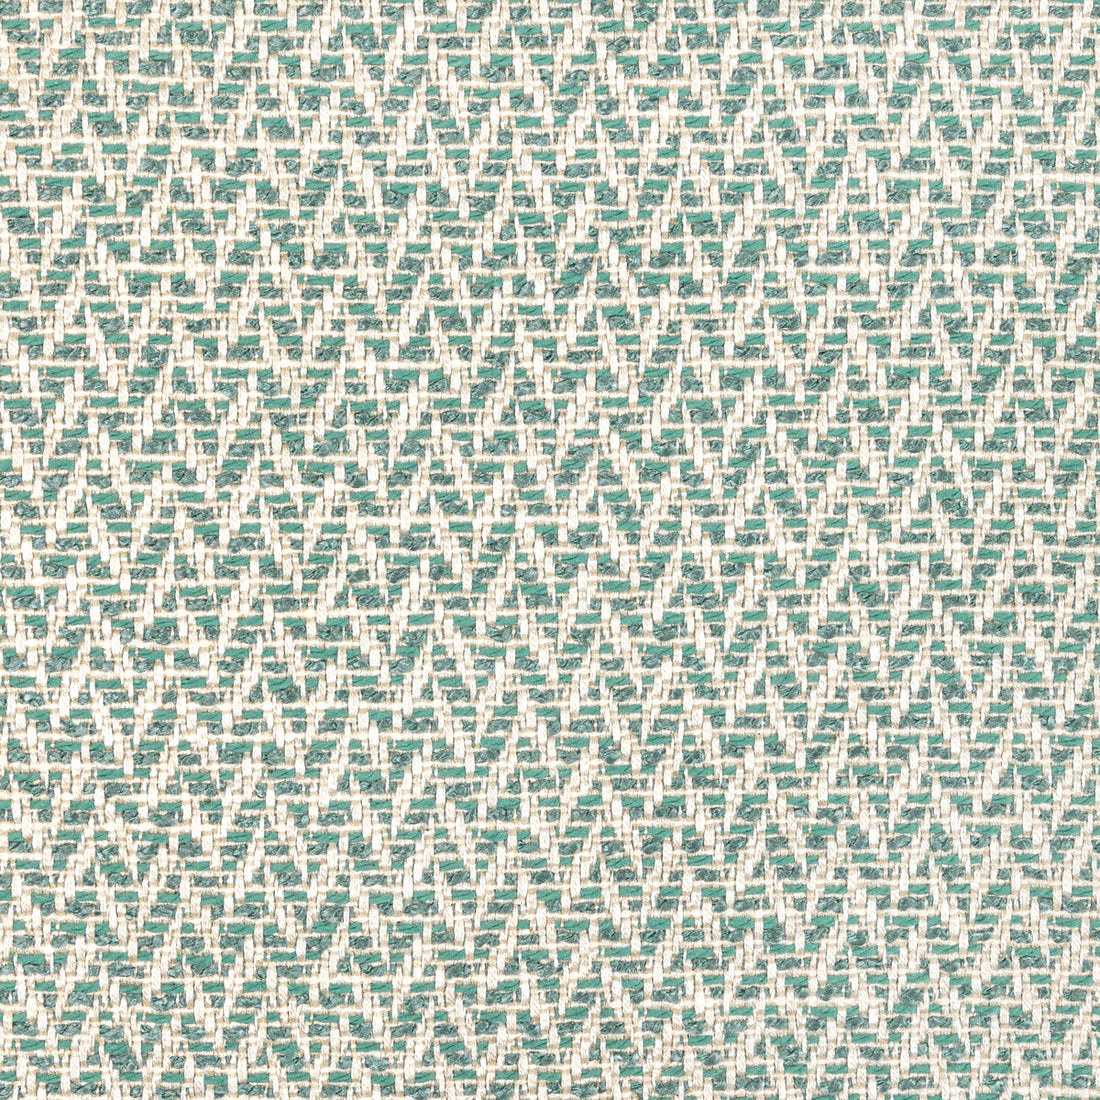 Kravet Design fabric in 36418-13 color - pattern 36418.13.0 - by Kravet Design in the Performance Crypton Home collection